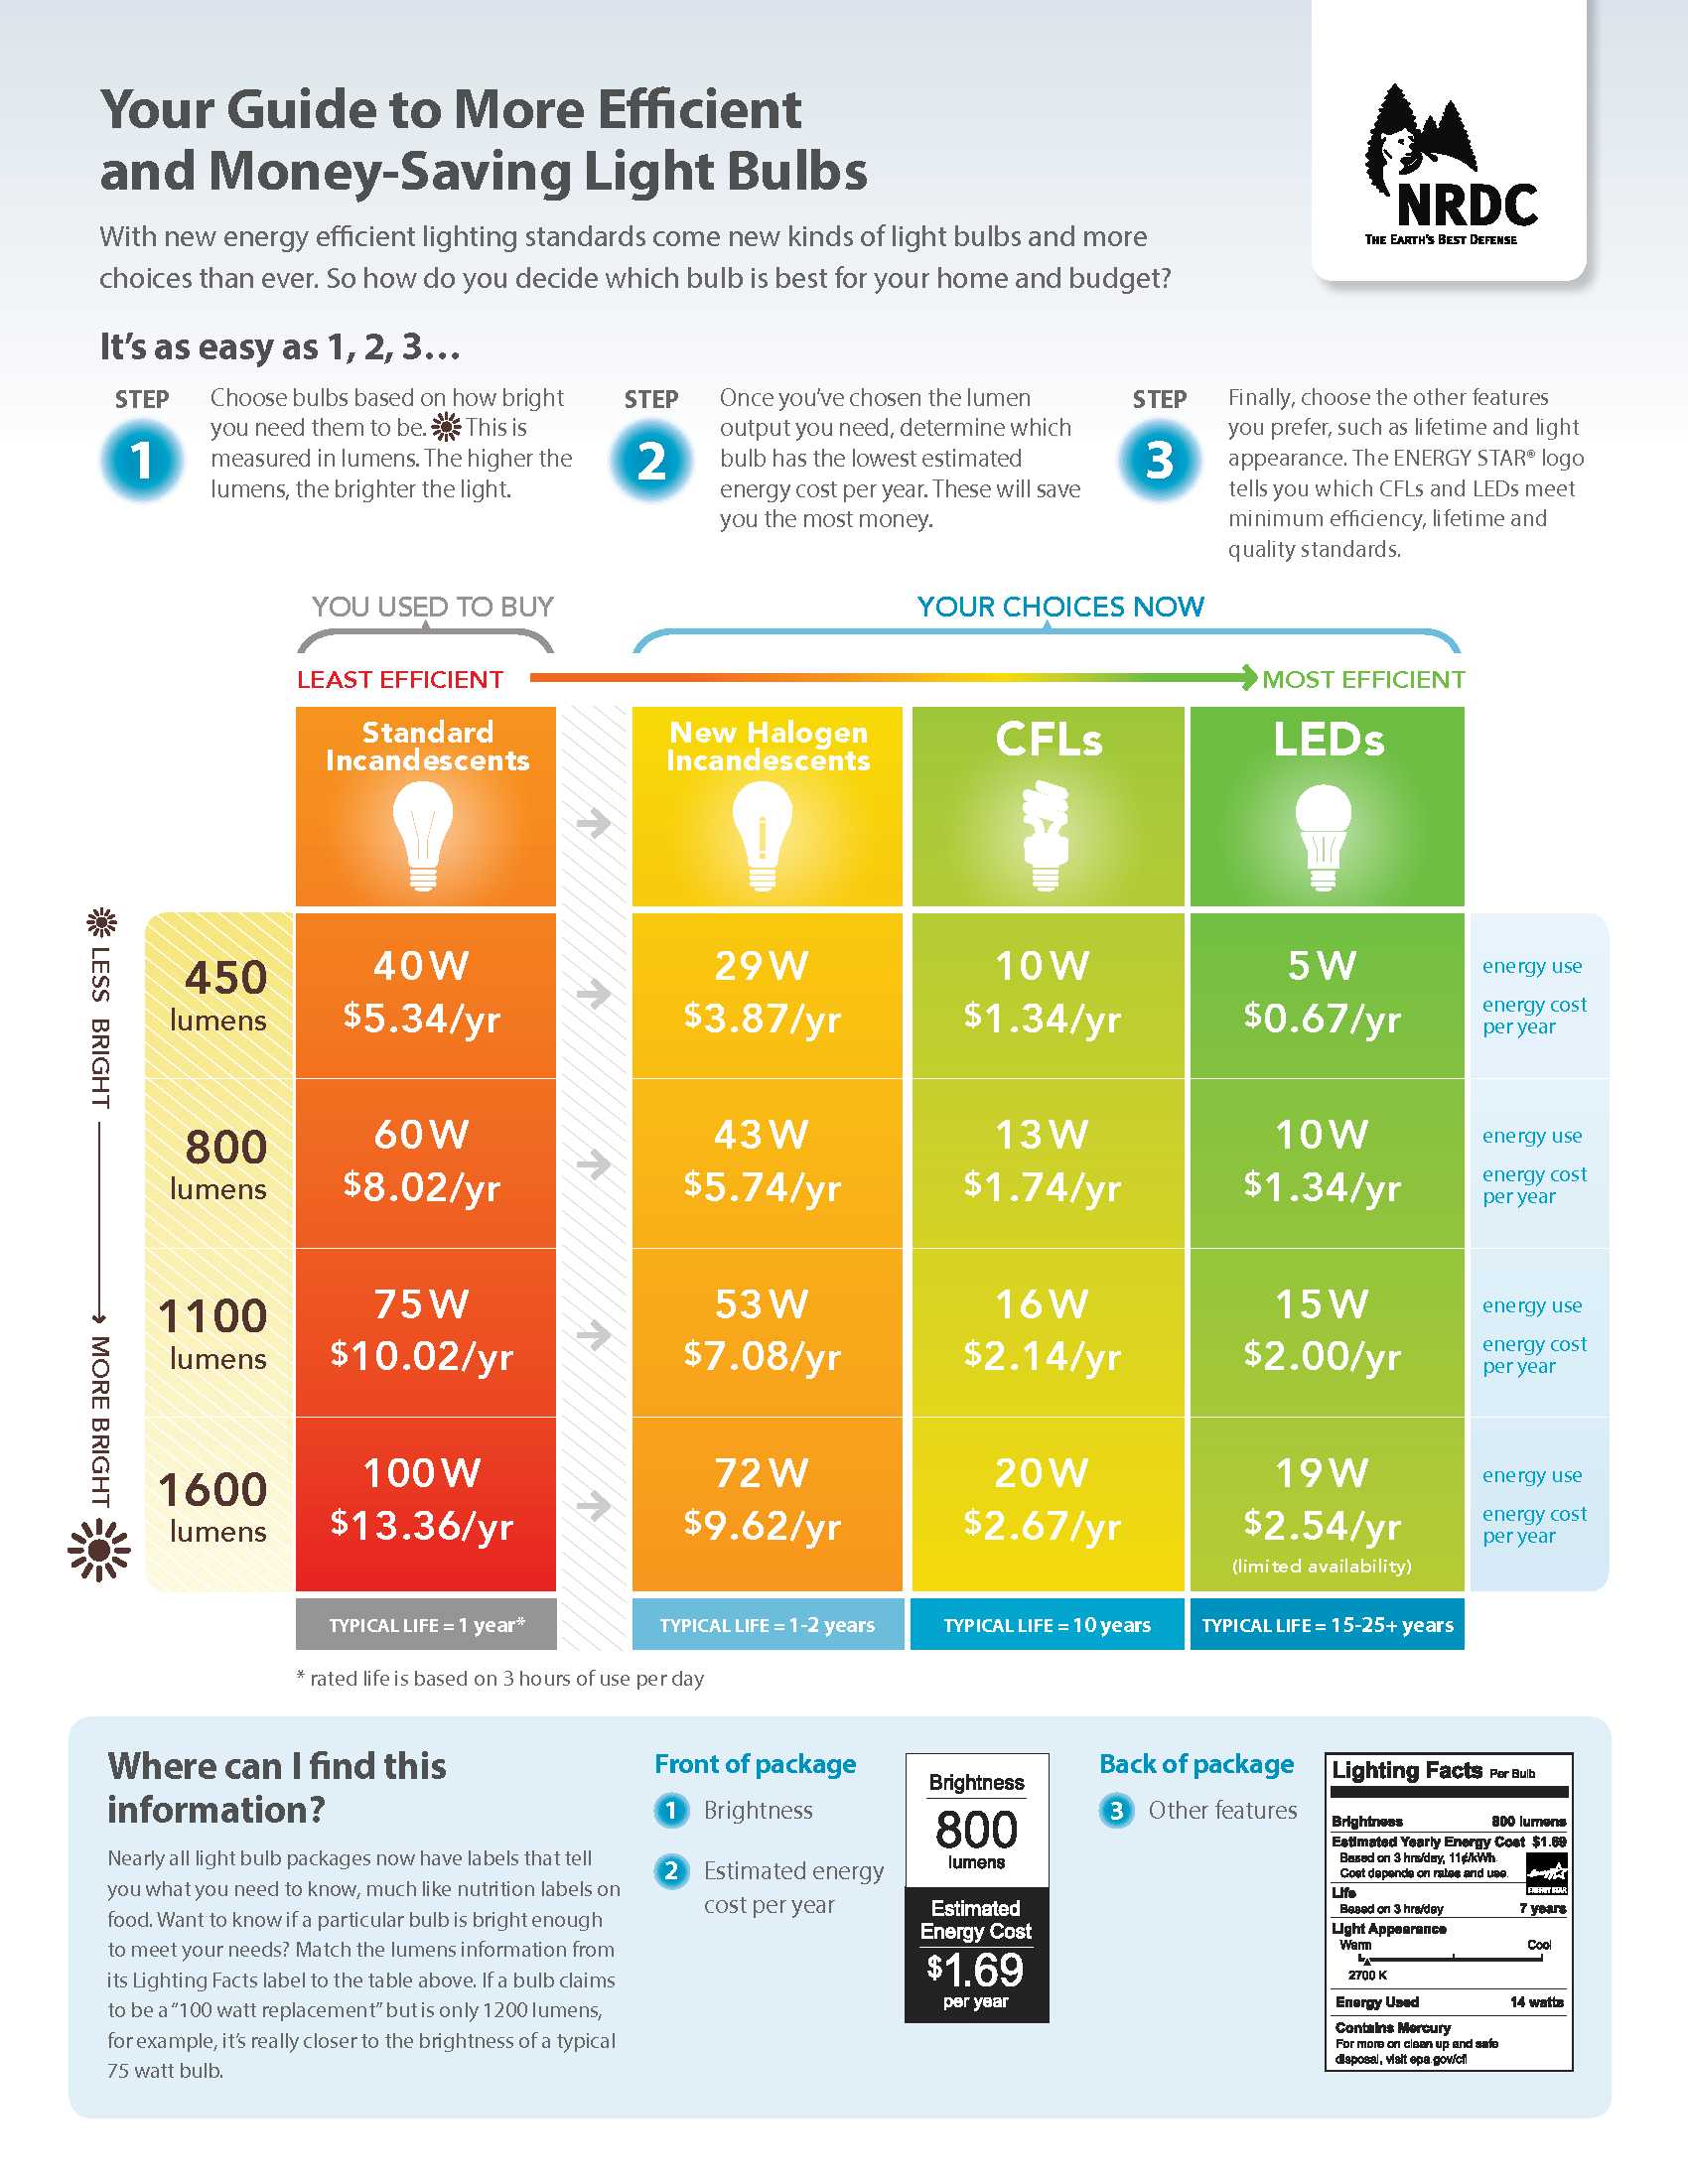 Pick the best energy-efficient light bulbs for your home or apt